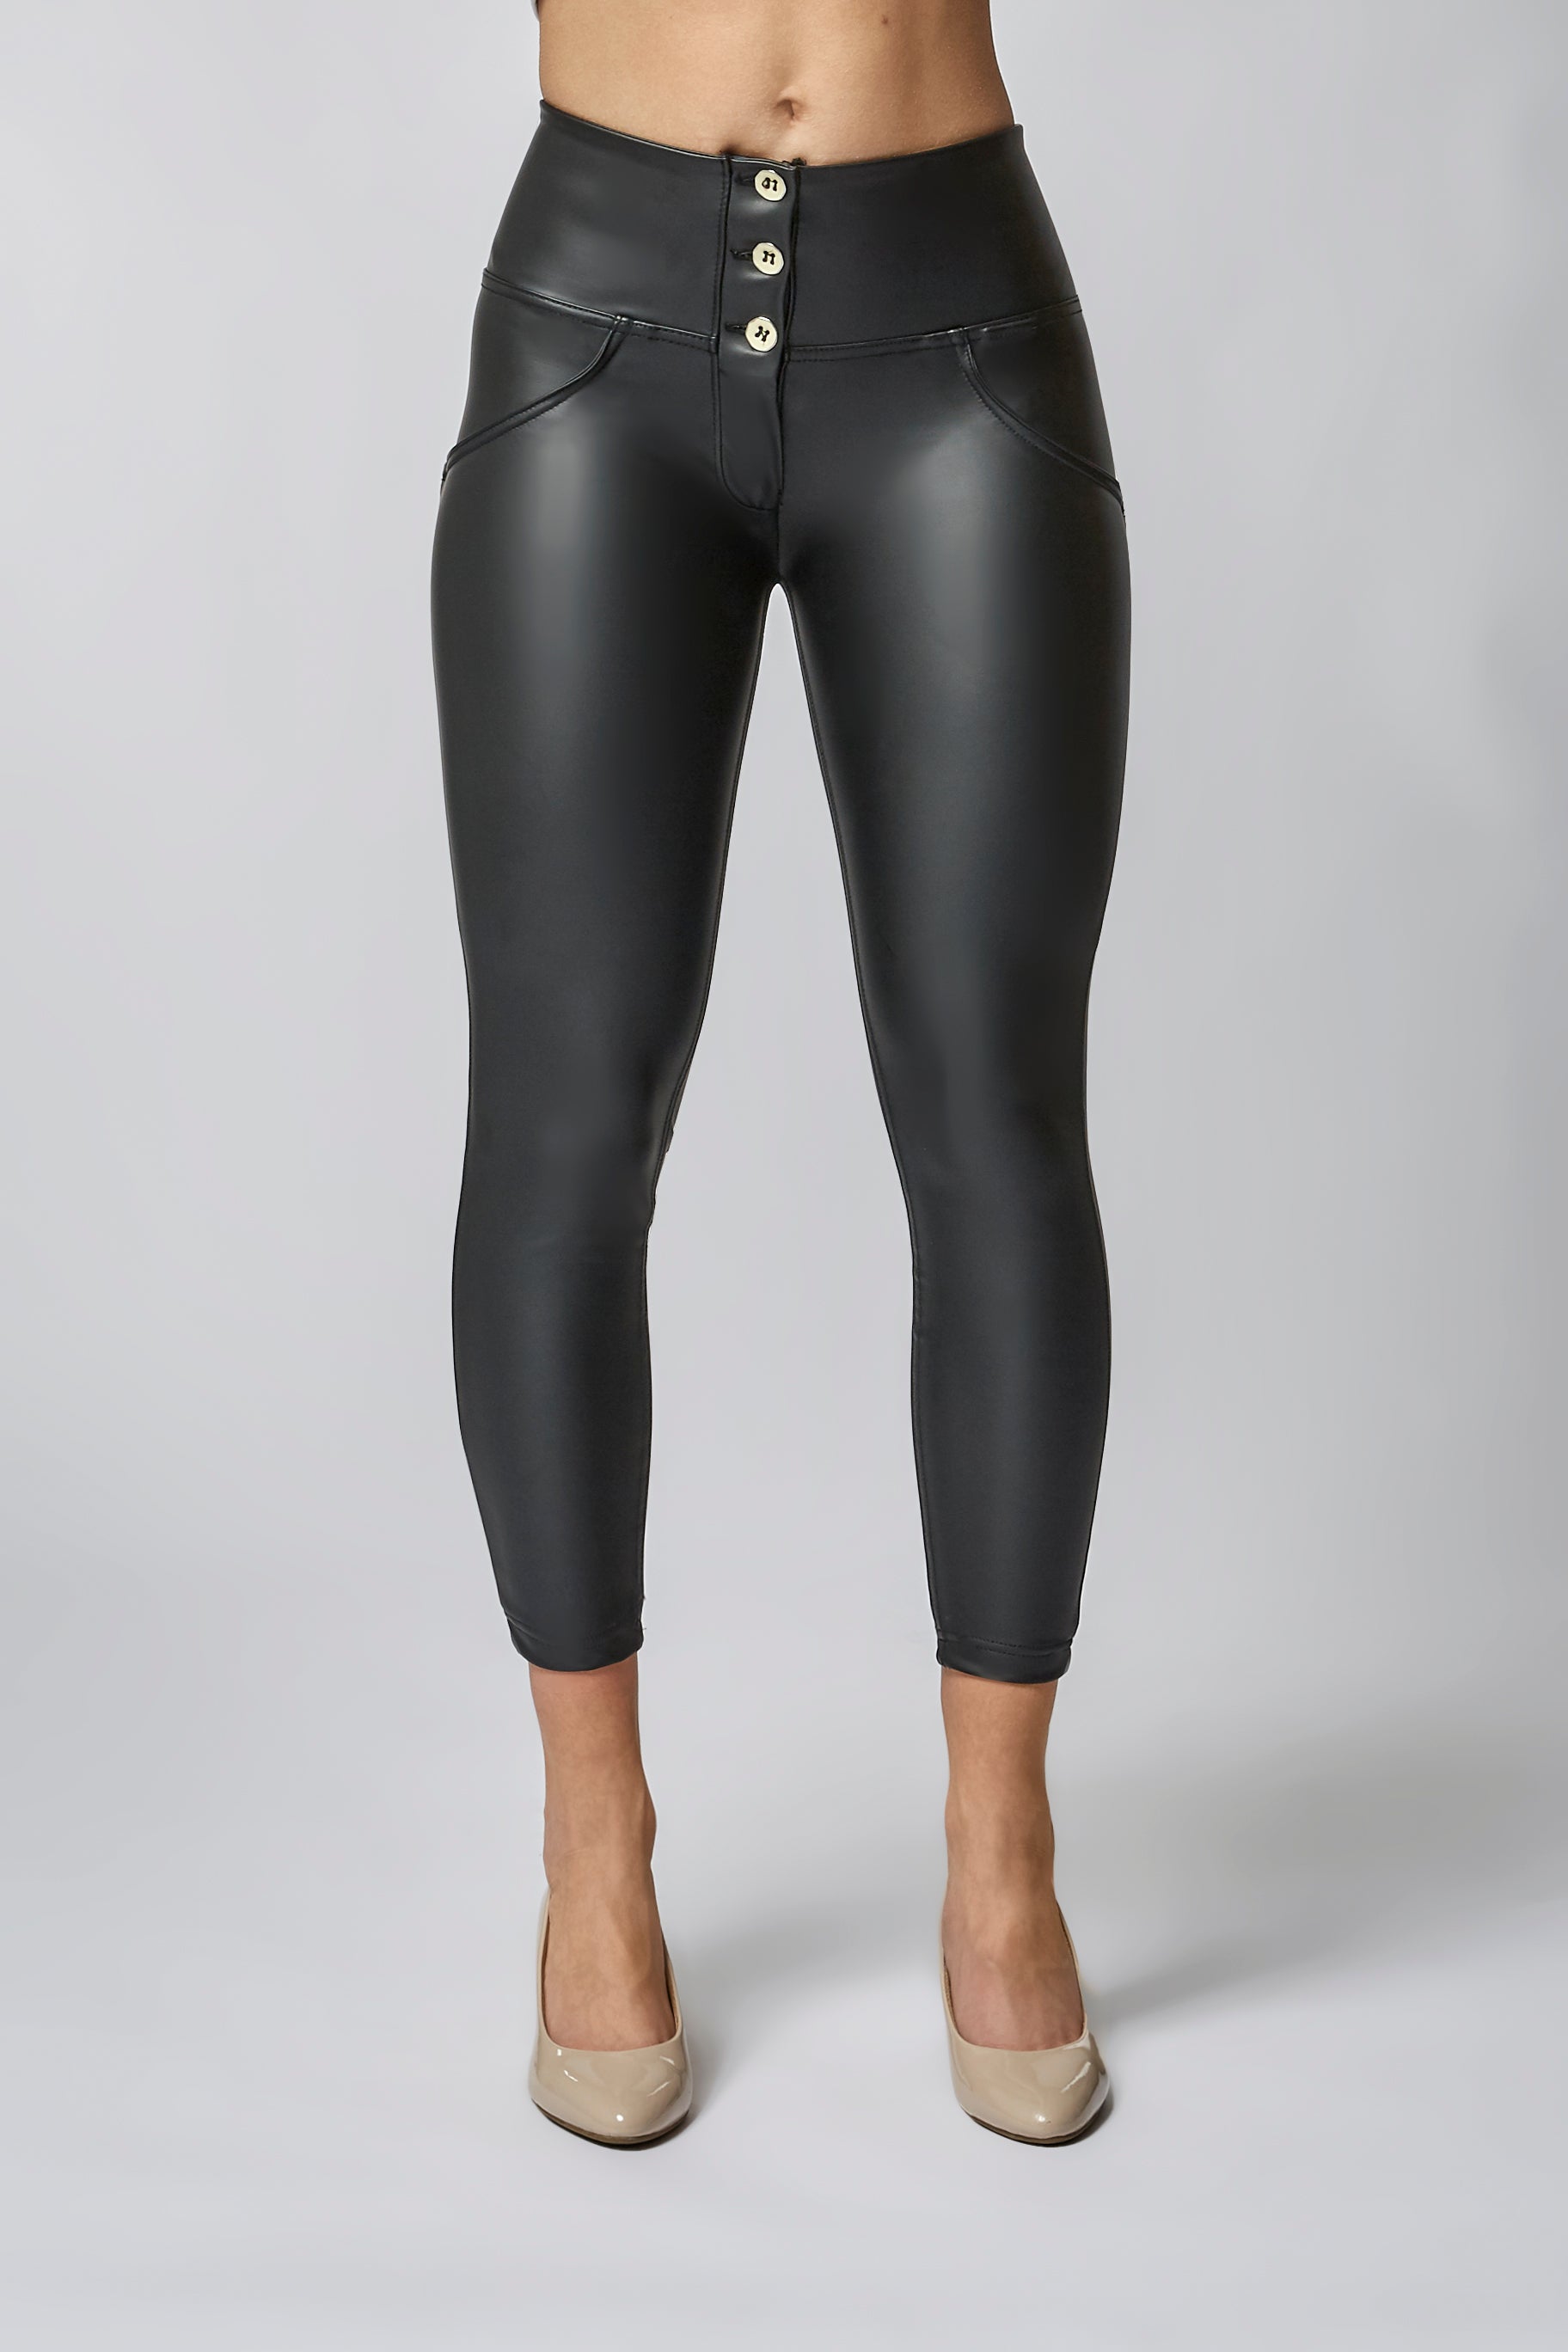 Liverpool Marilyn High-Rise Faux Leather Legging Pant : Black